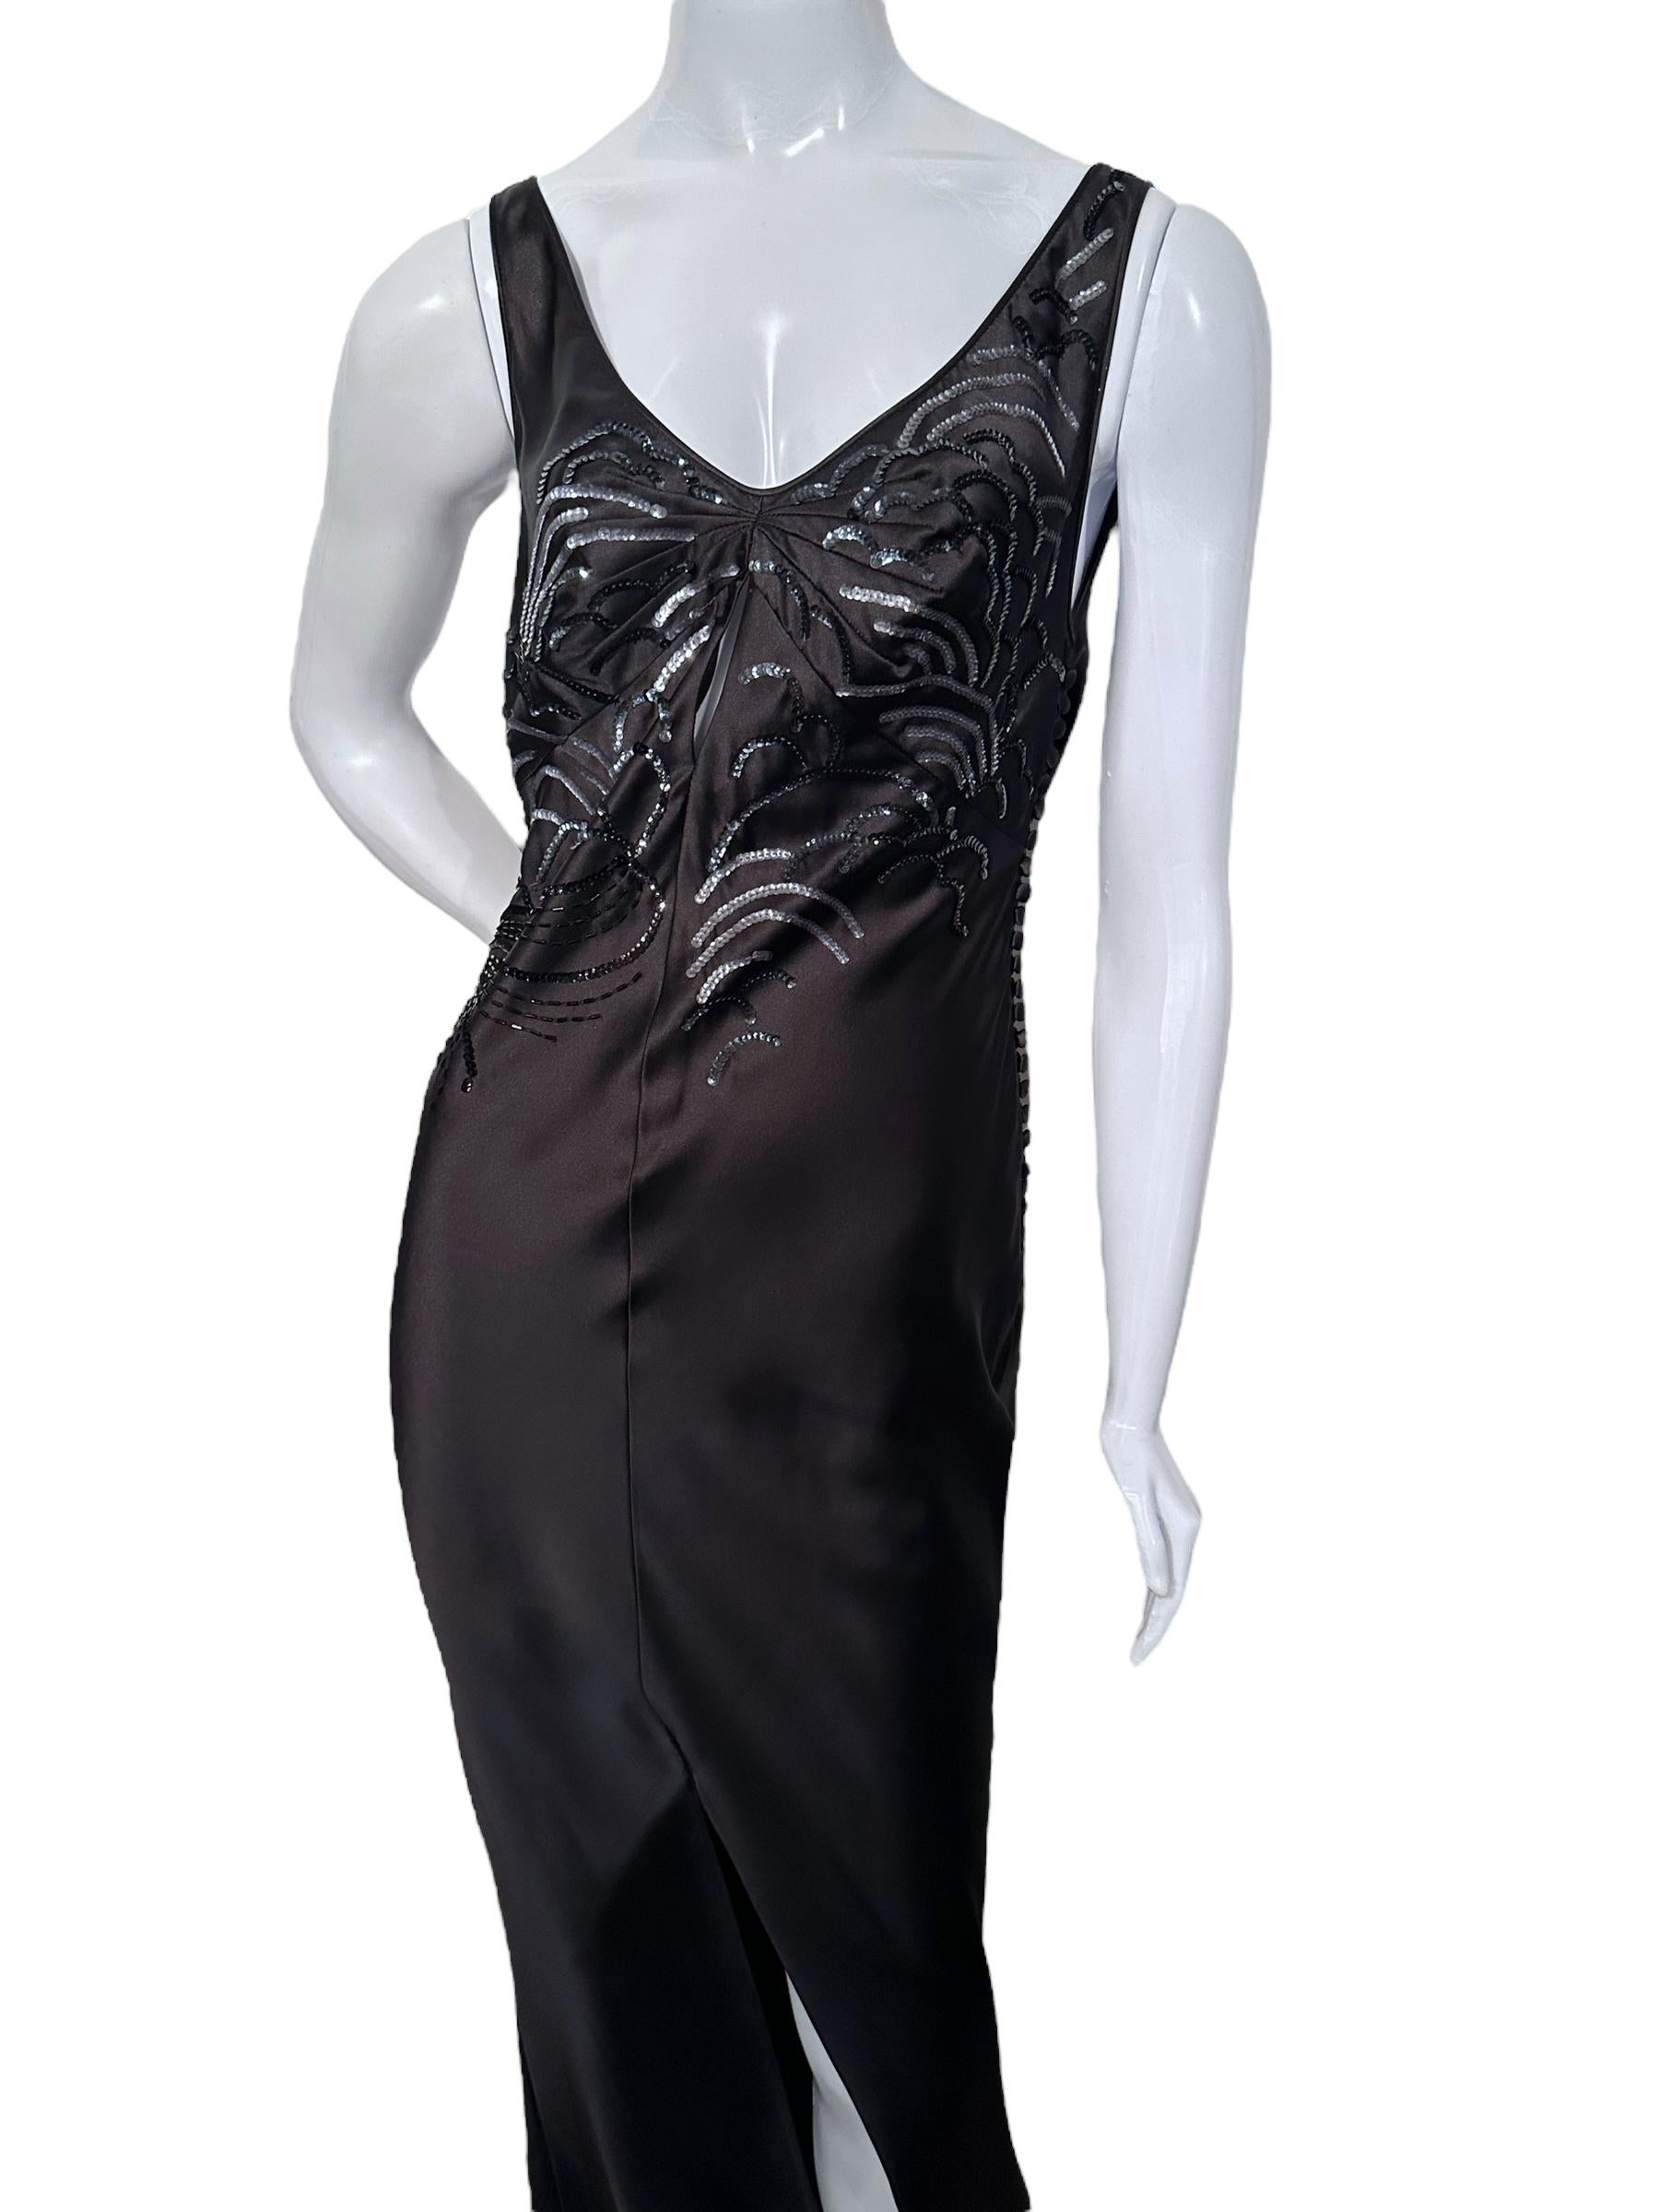 Iconic Christian Dior By John Galliano Ss 2005 Beaded Bodice Black Gown For Sale 6